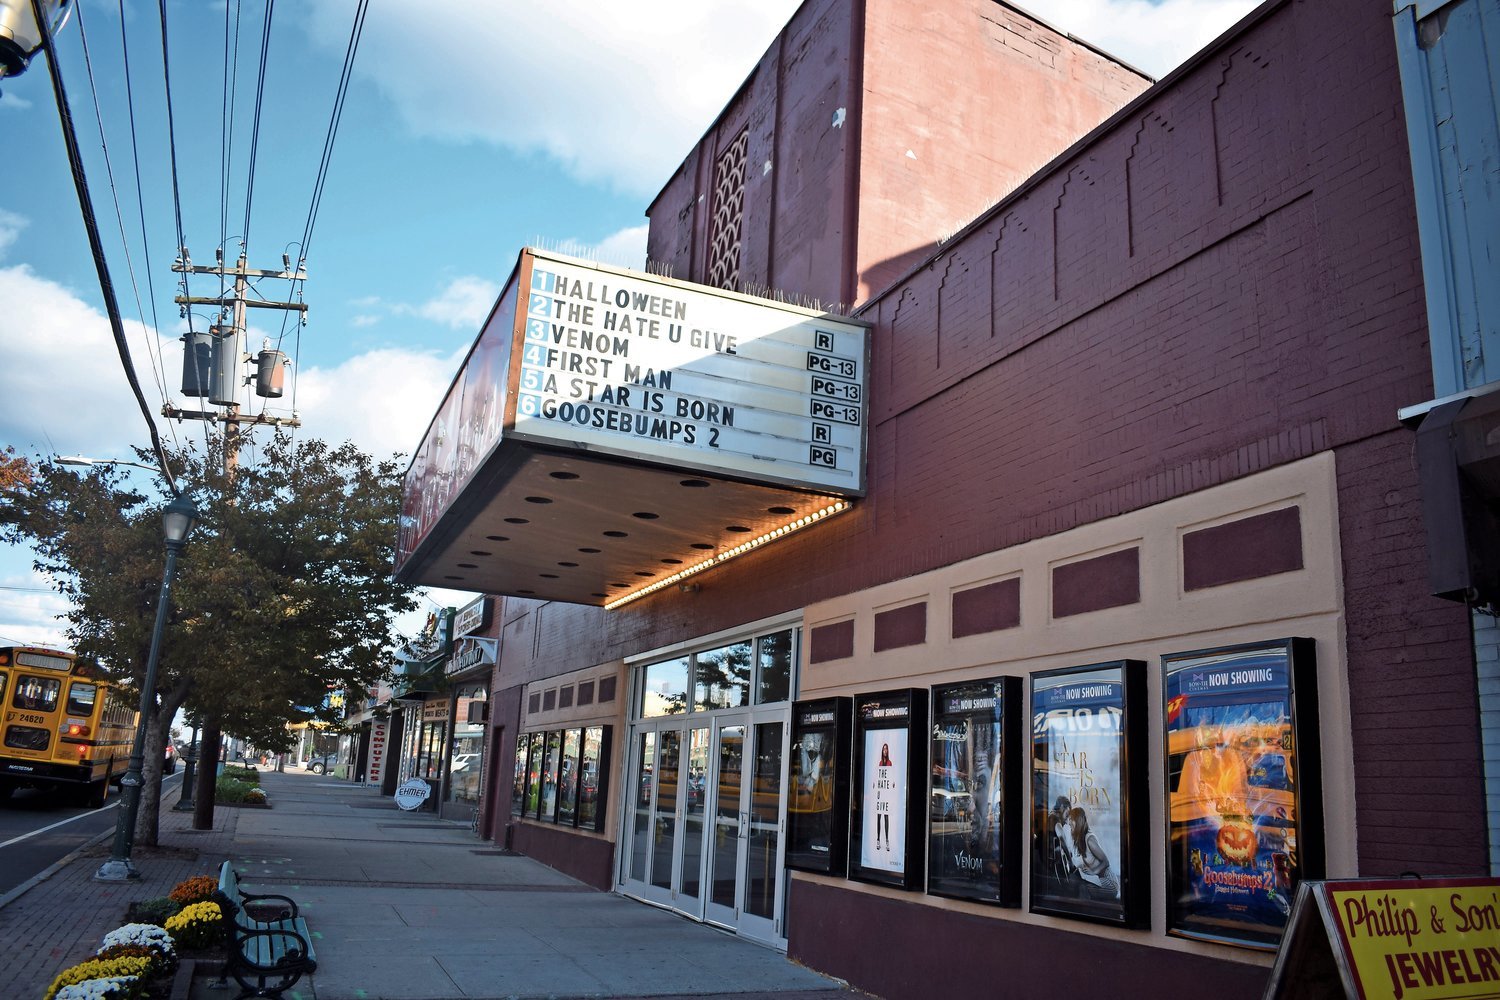 This Franklin Square movie theater, which is among the few Art Deco structures left in the Town of Hempstead, was recently granted historic landmark status by the Town of Hempstead.